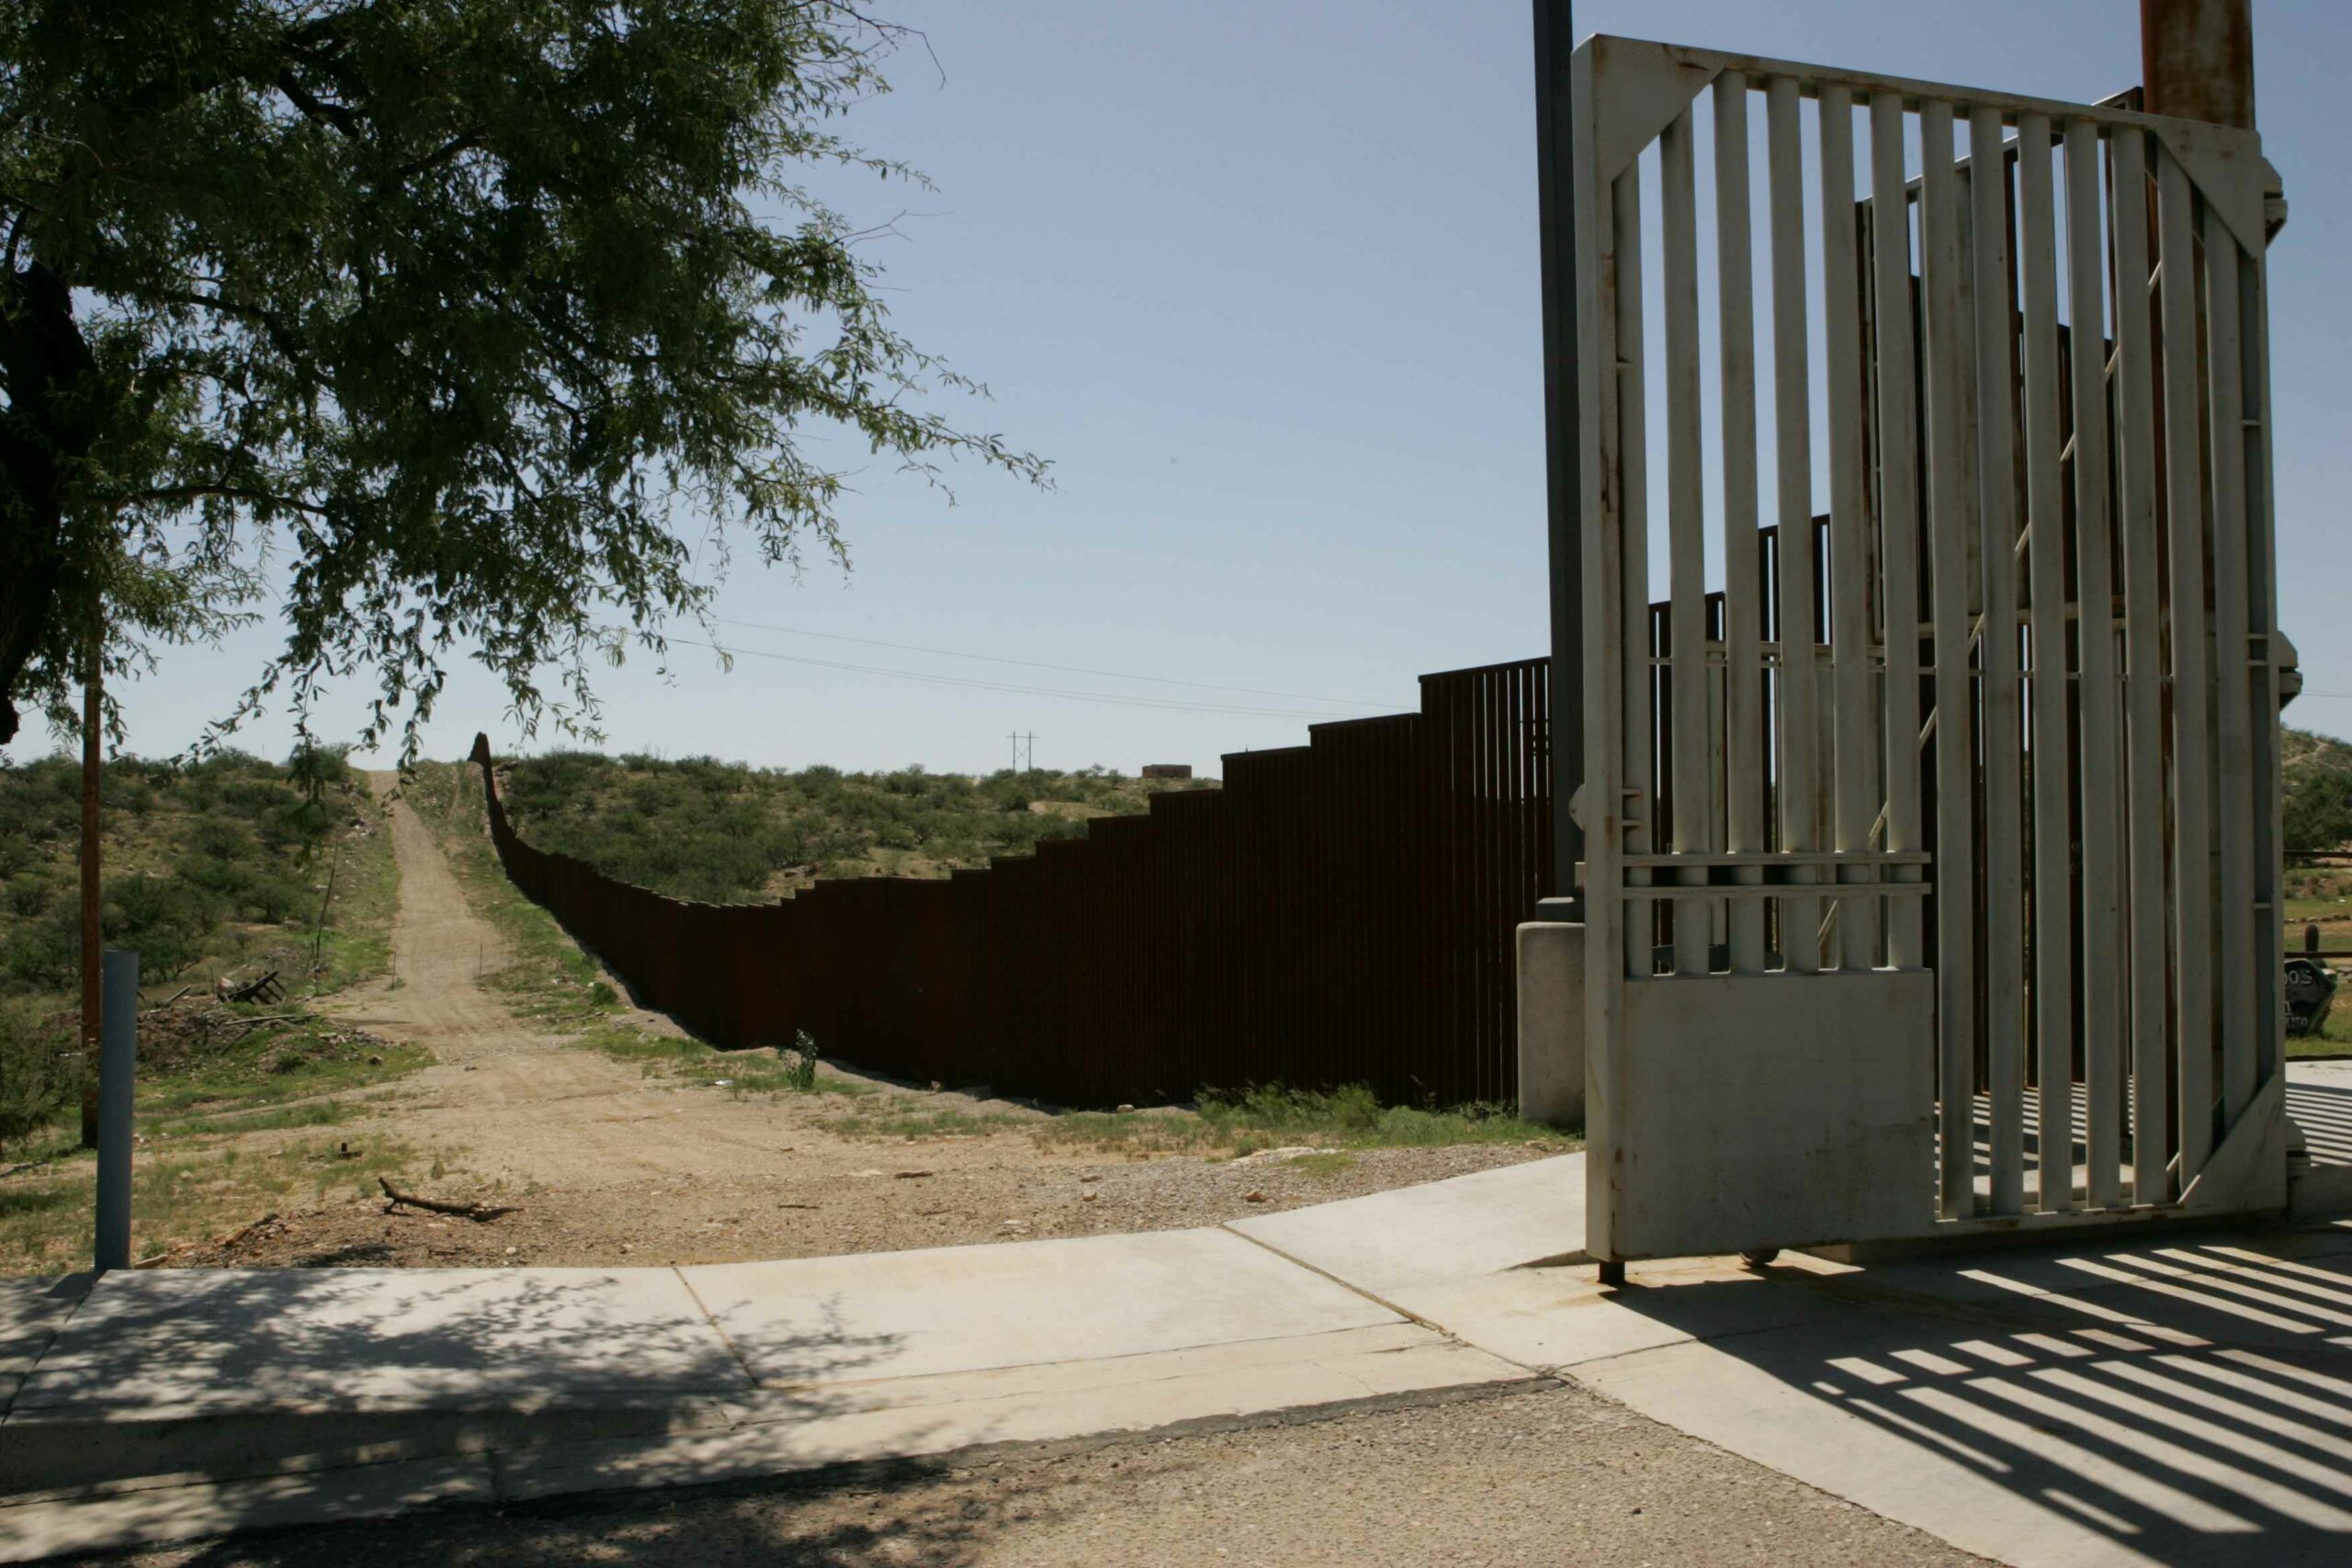 Border wall, apparently unfinished, with sidewalk and driveway in foreground